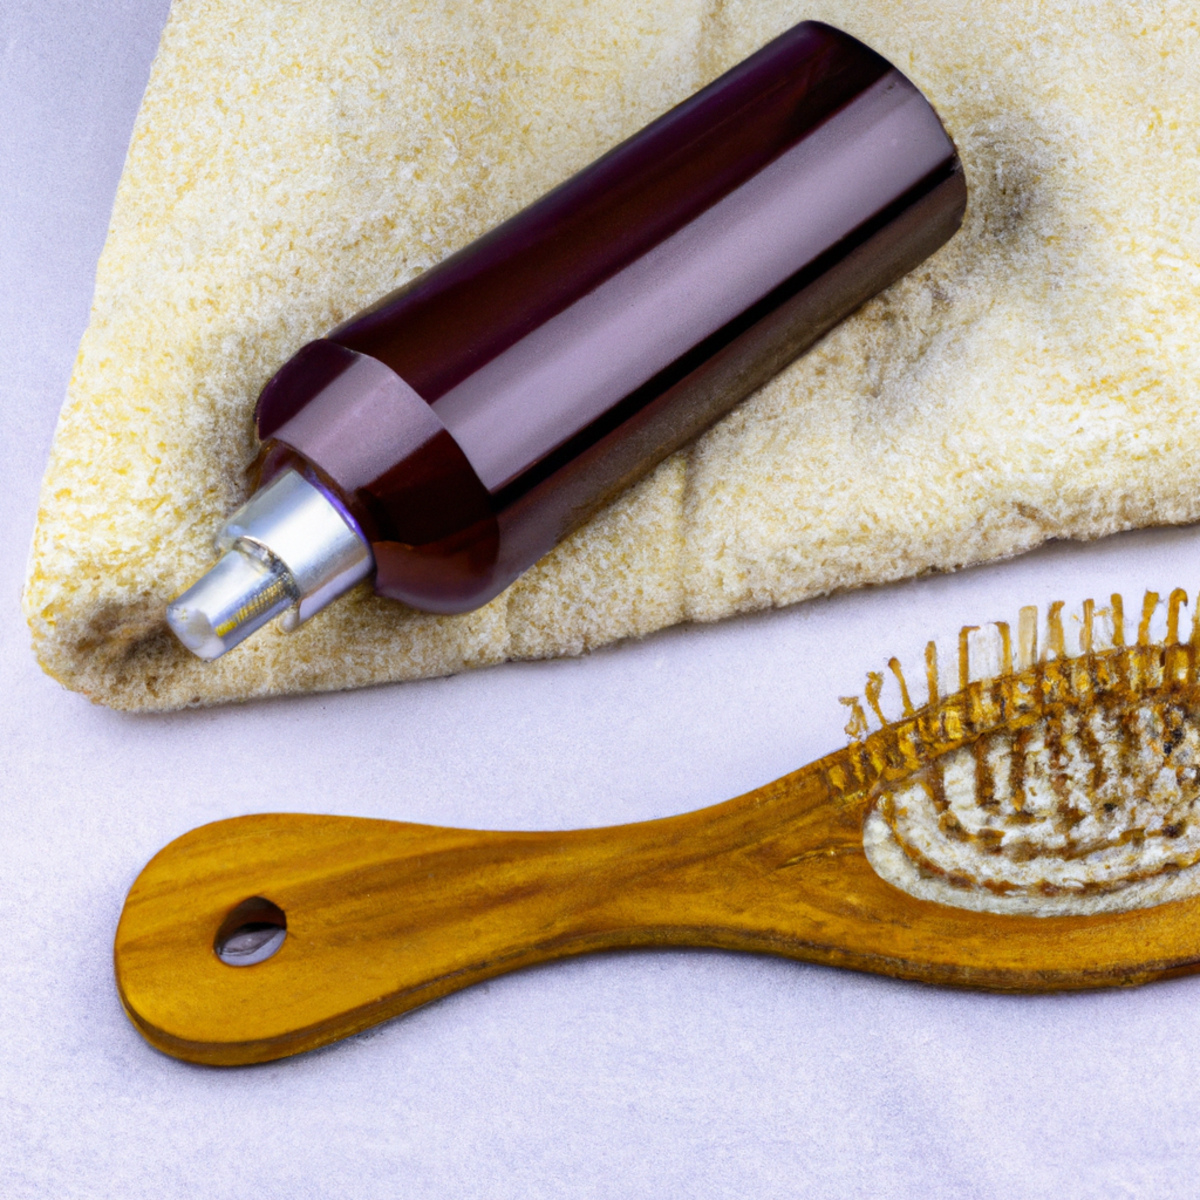 Hair care tools on white towel with leave-in conditioner spray.